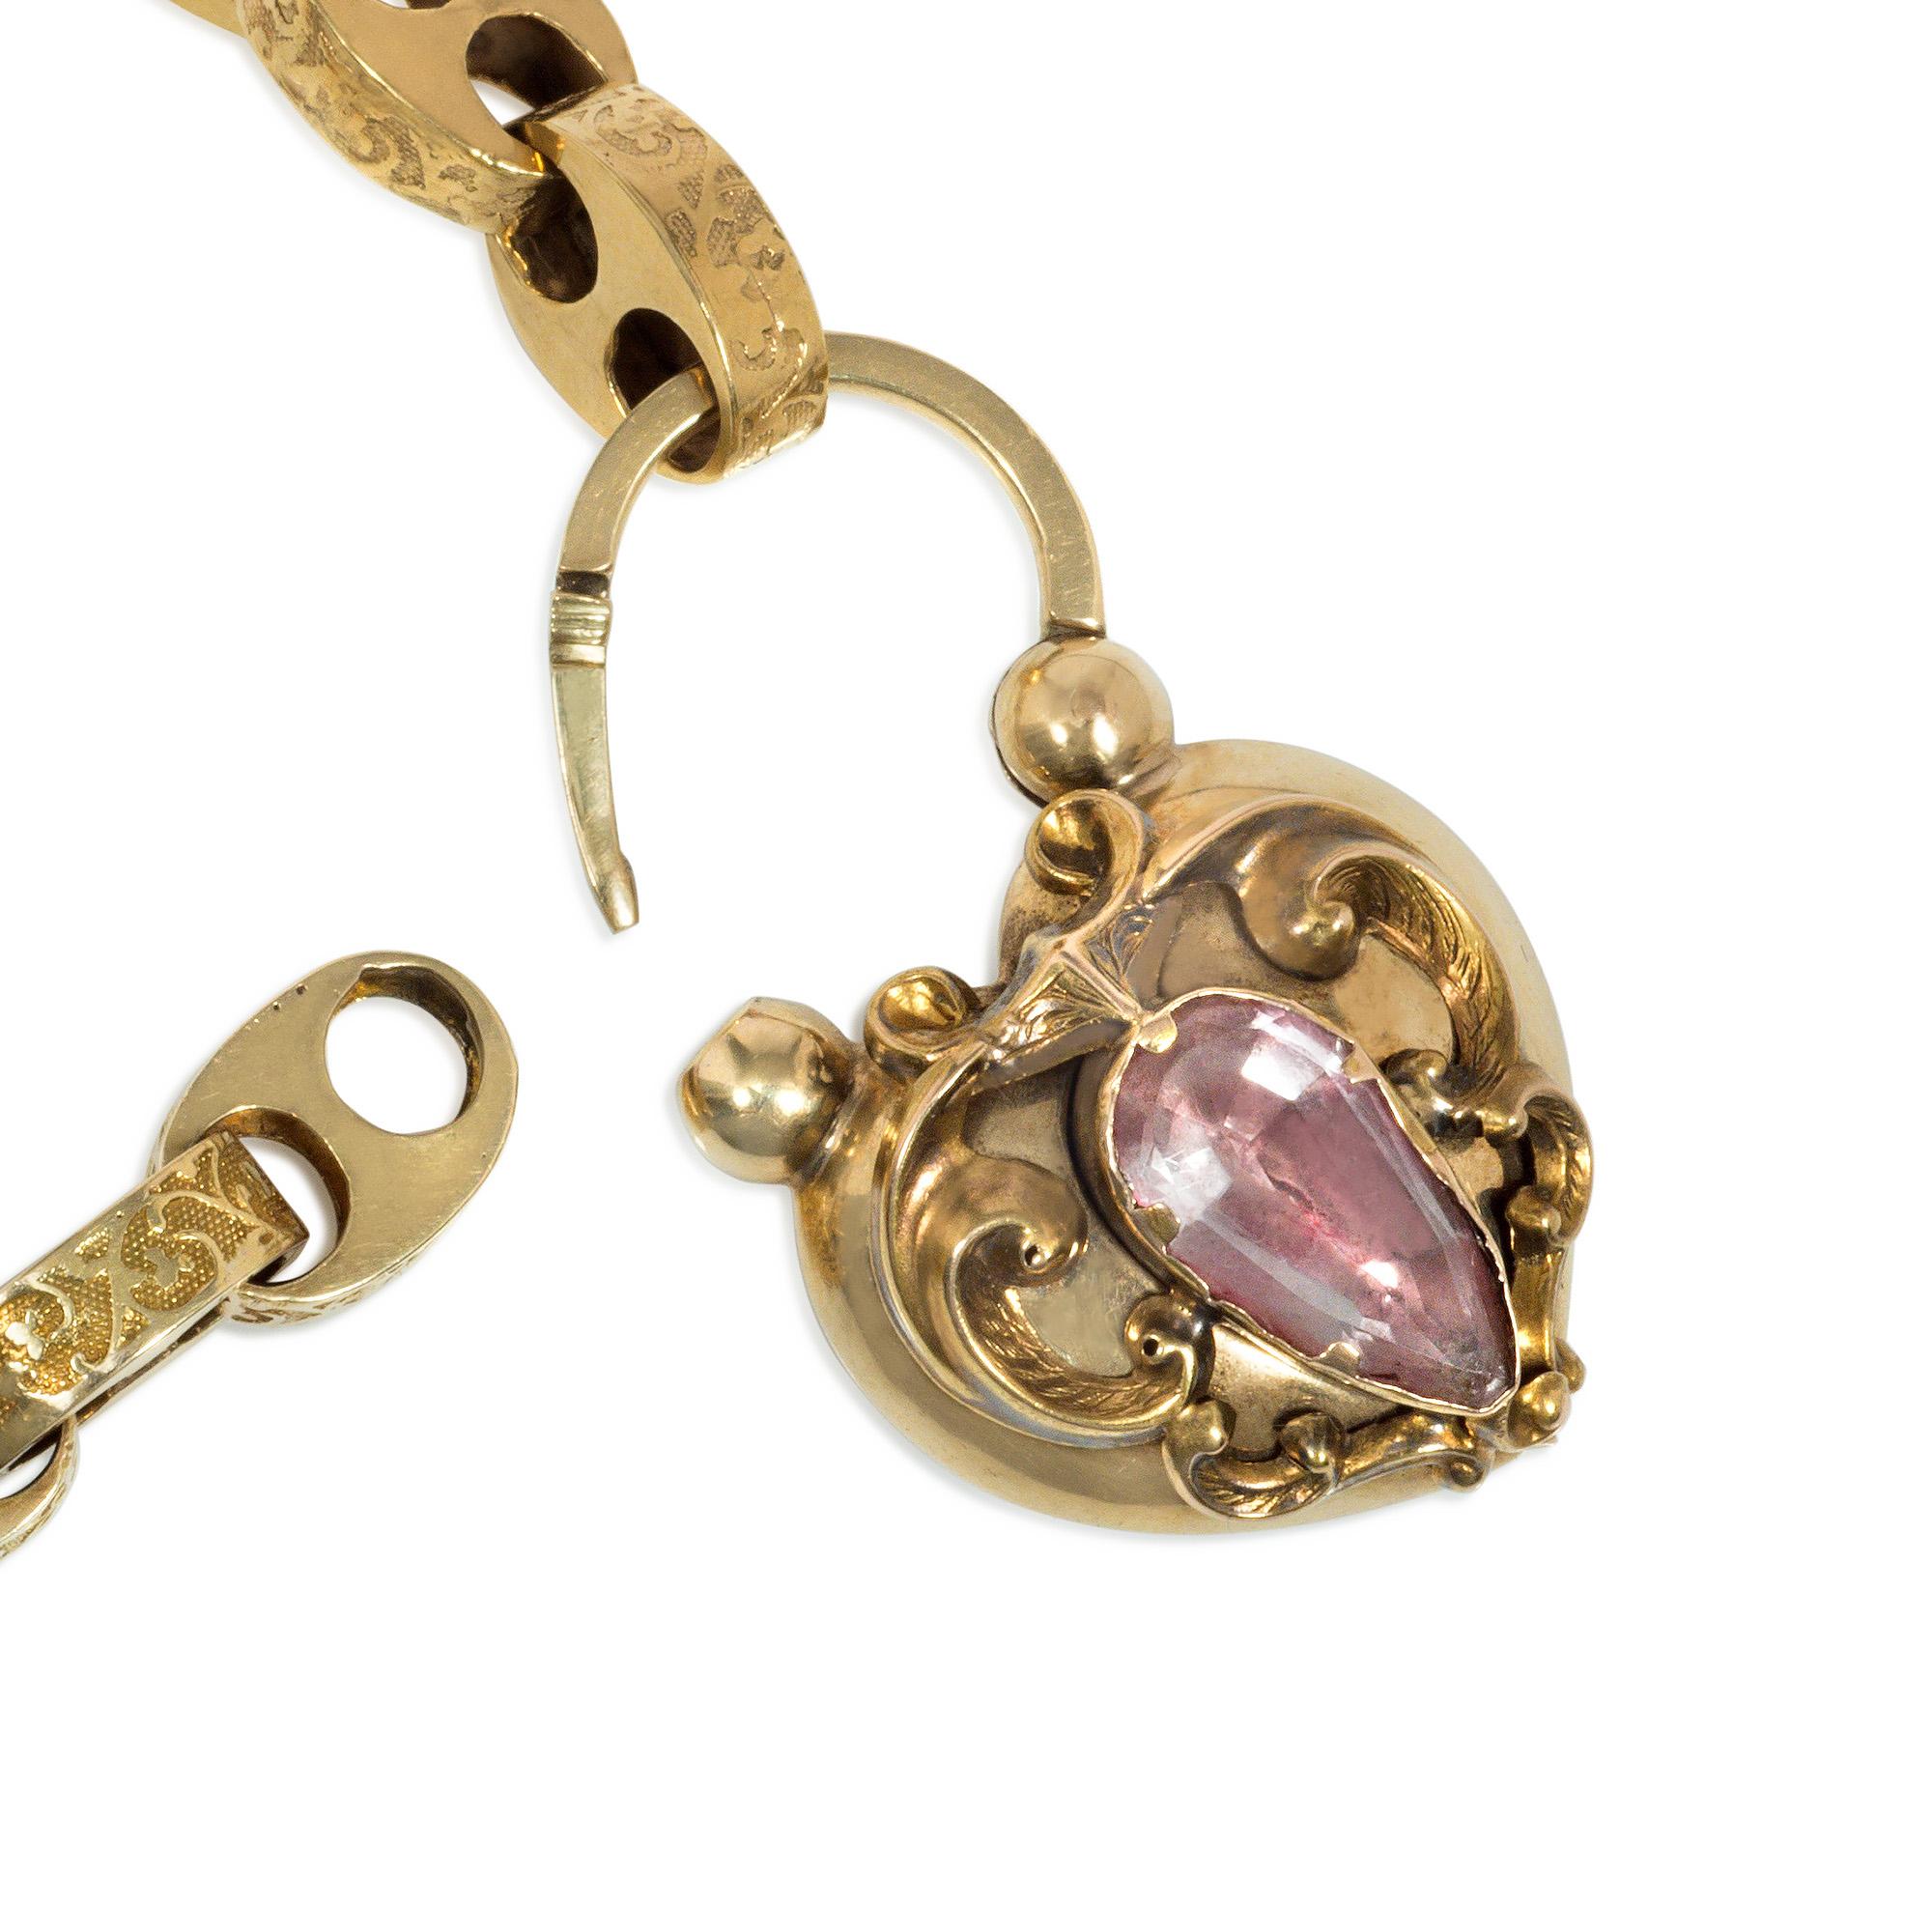 Early Victorian Antique Victorian Gold and Pink Topaz Bracelet with Heart-Shaped Padlock Clasp For Sale